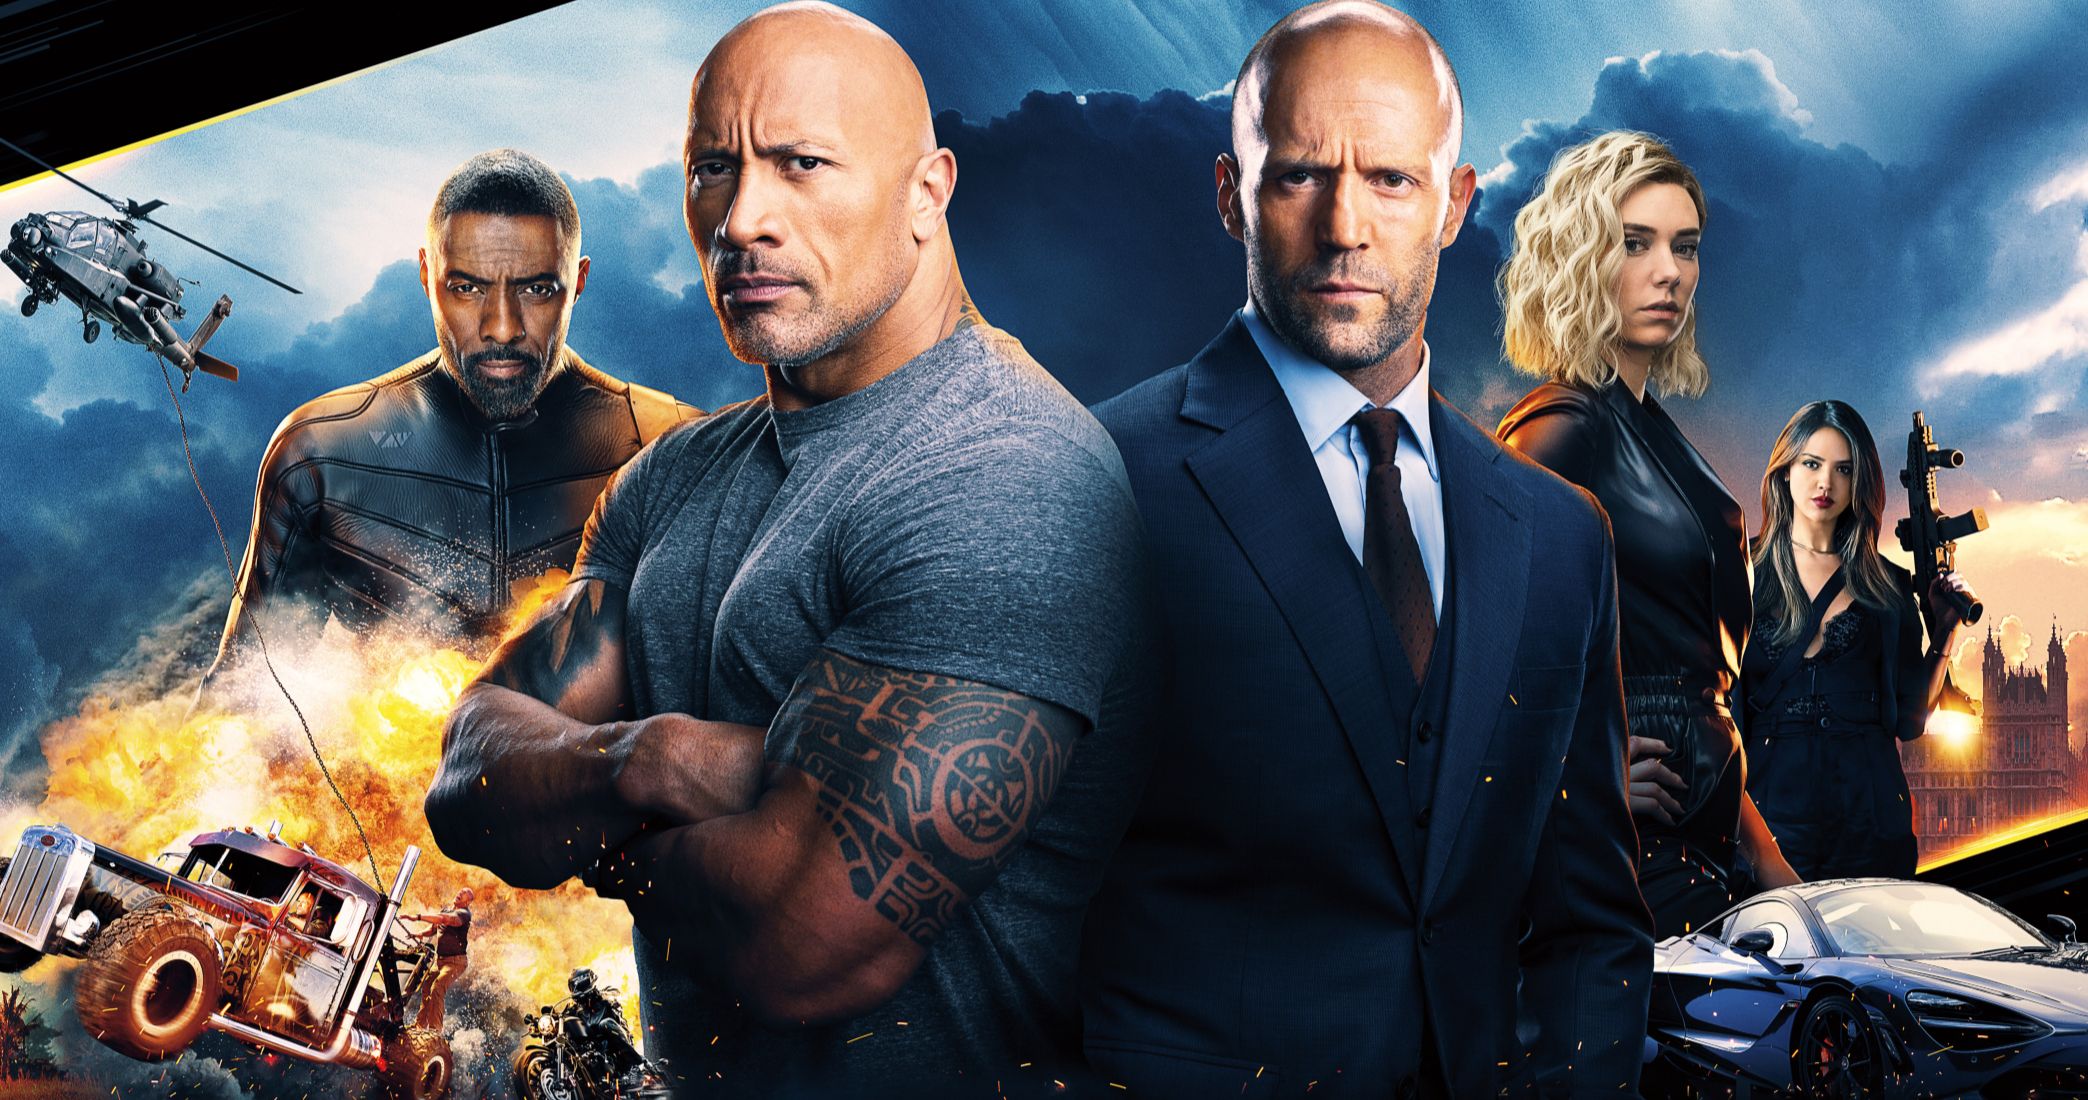 Hobbs & Shaw Review: A Bloated, Numbing Action Spectacle